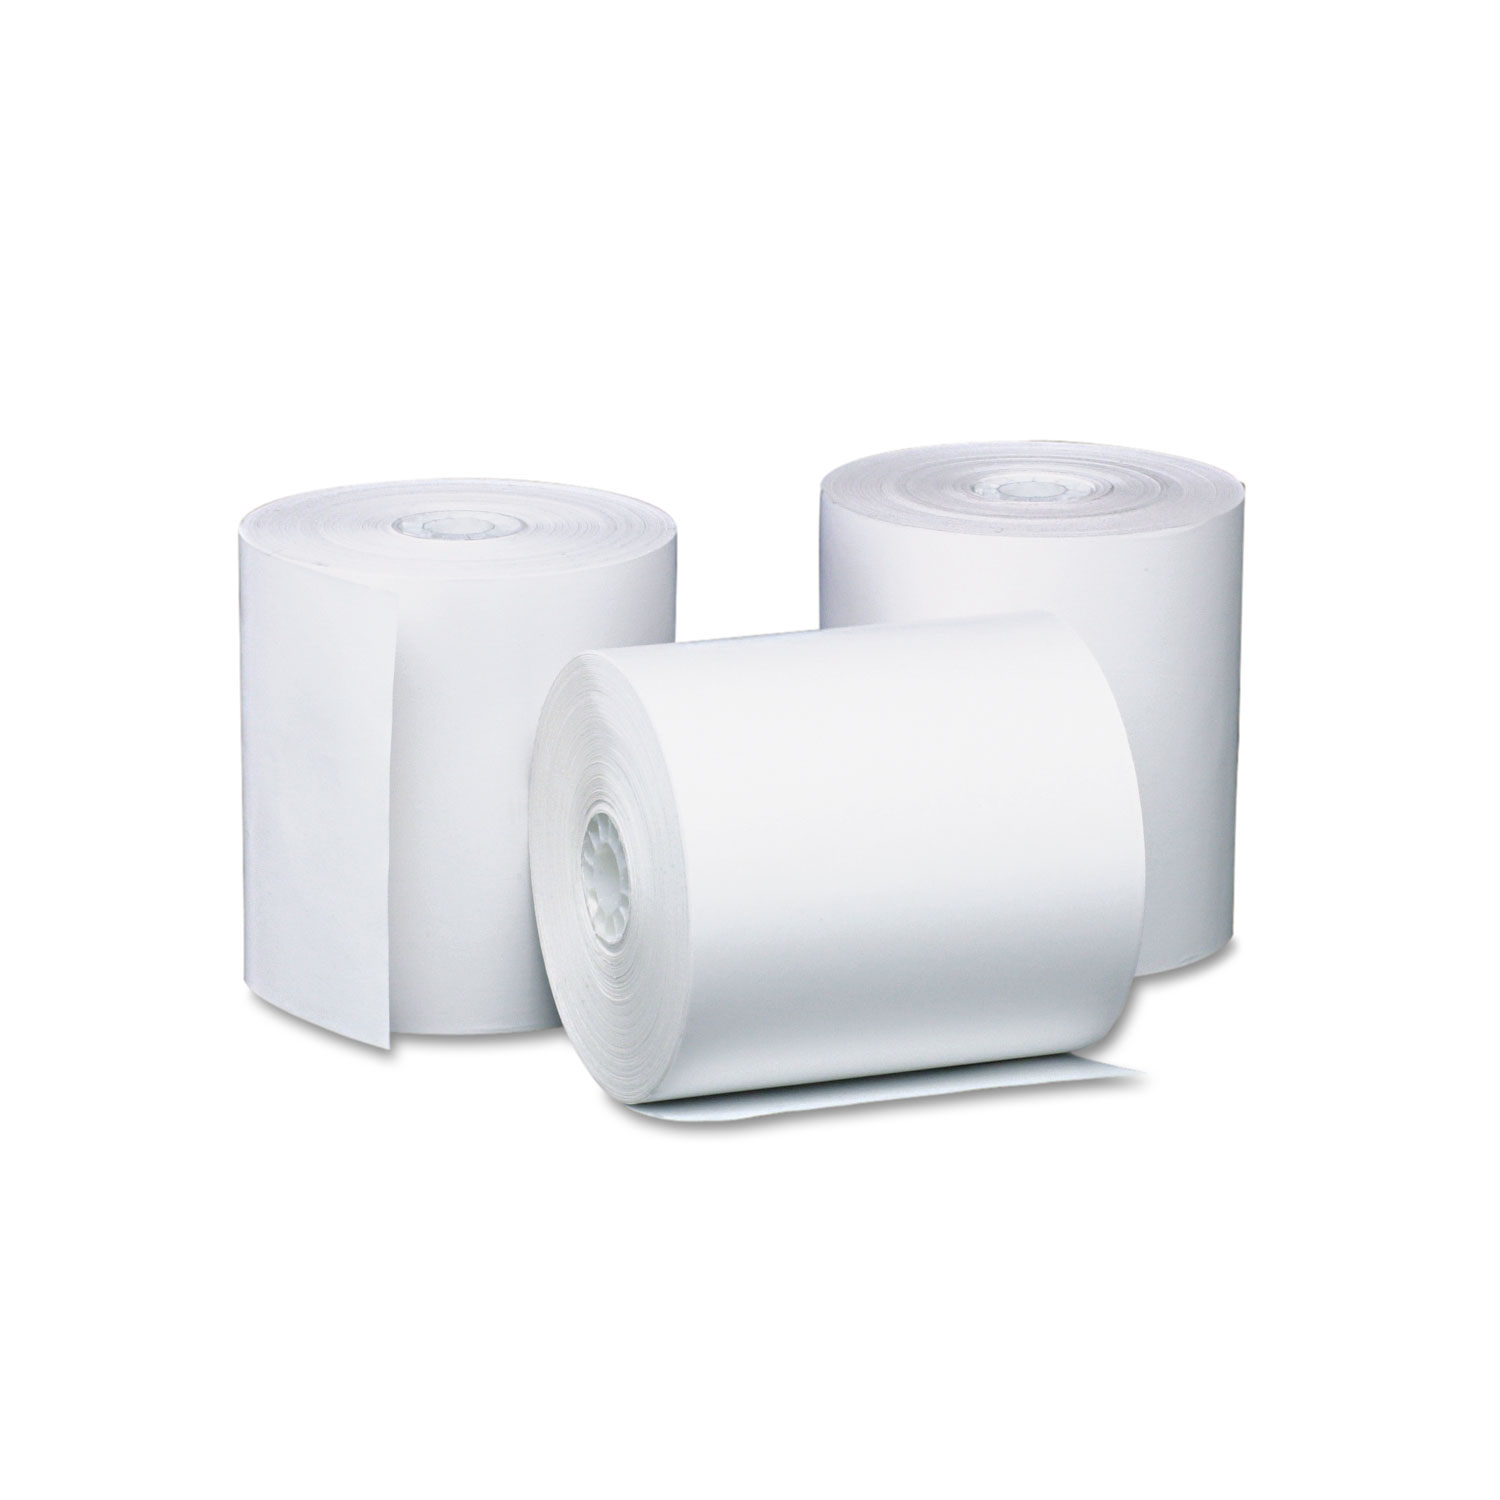  Iconex 05217 Direct Thermal Printing Thermal Paper Rolls, 3.13 x 230 ft, White, 8/Pack (ICX90903216) 